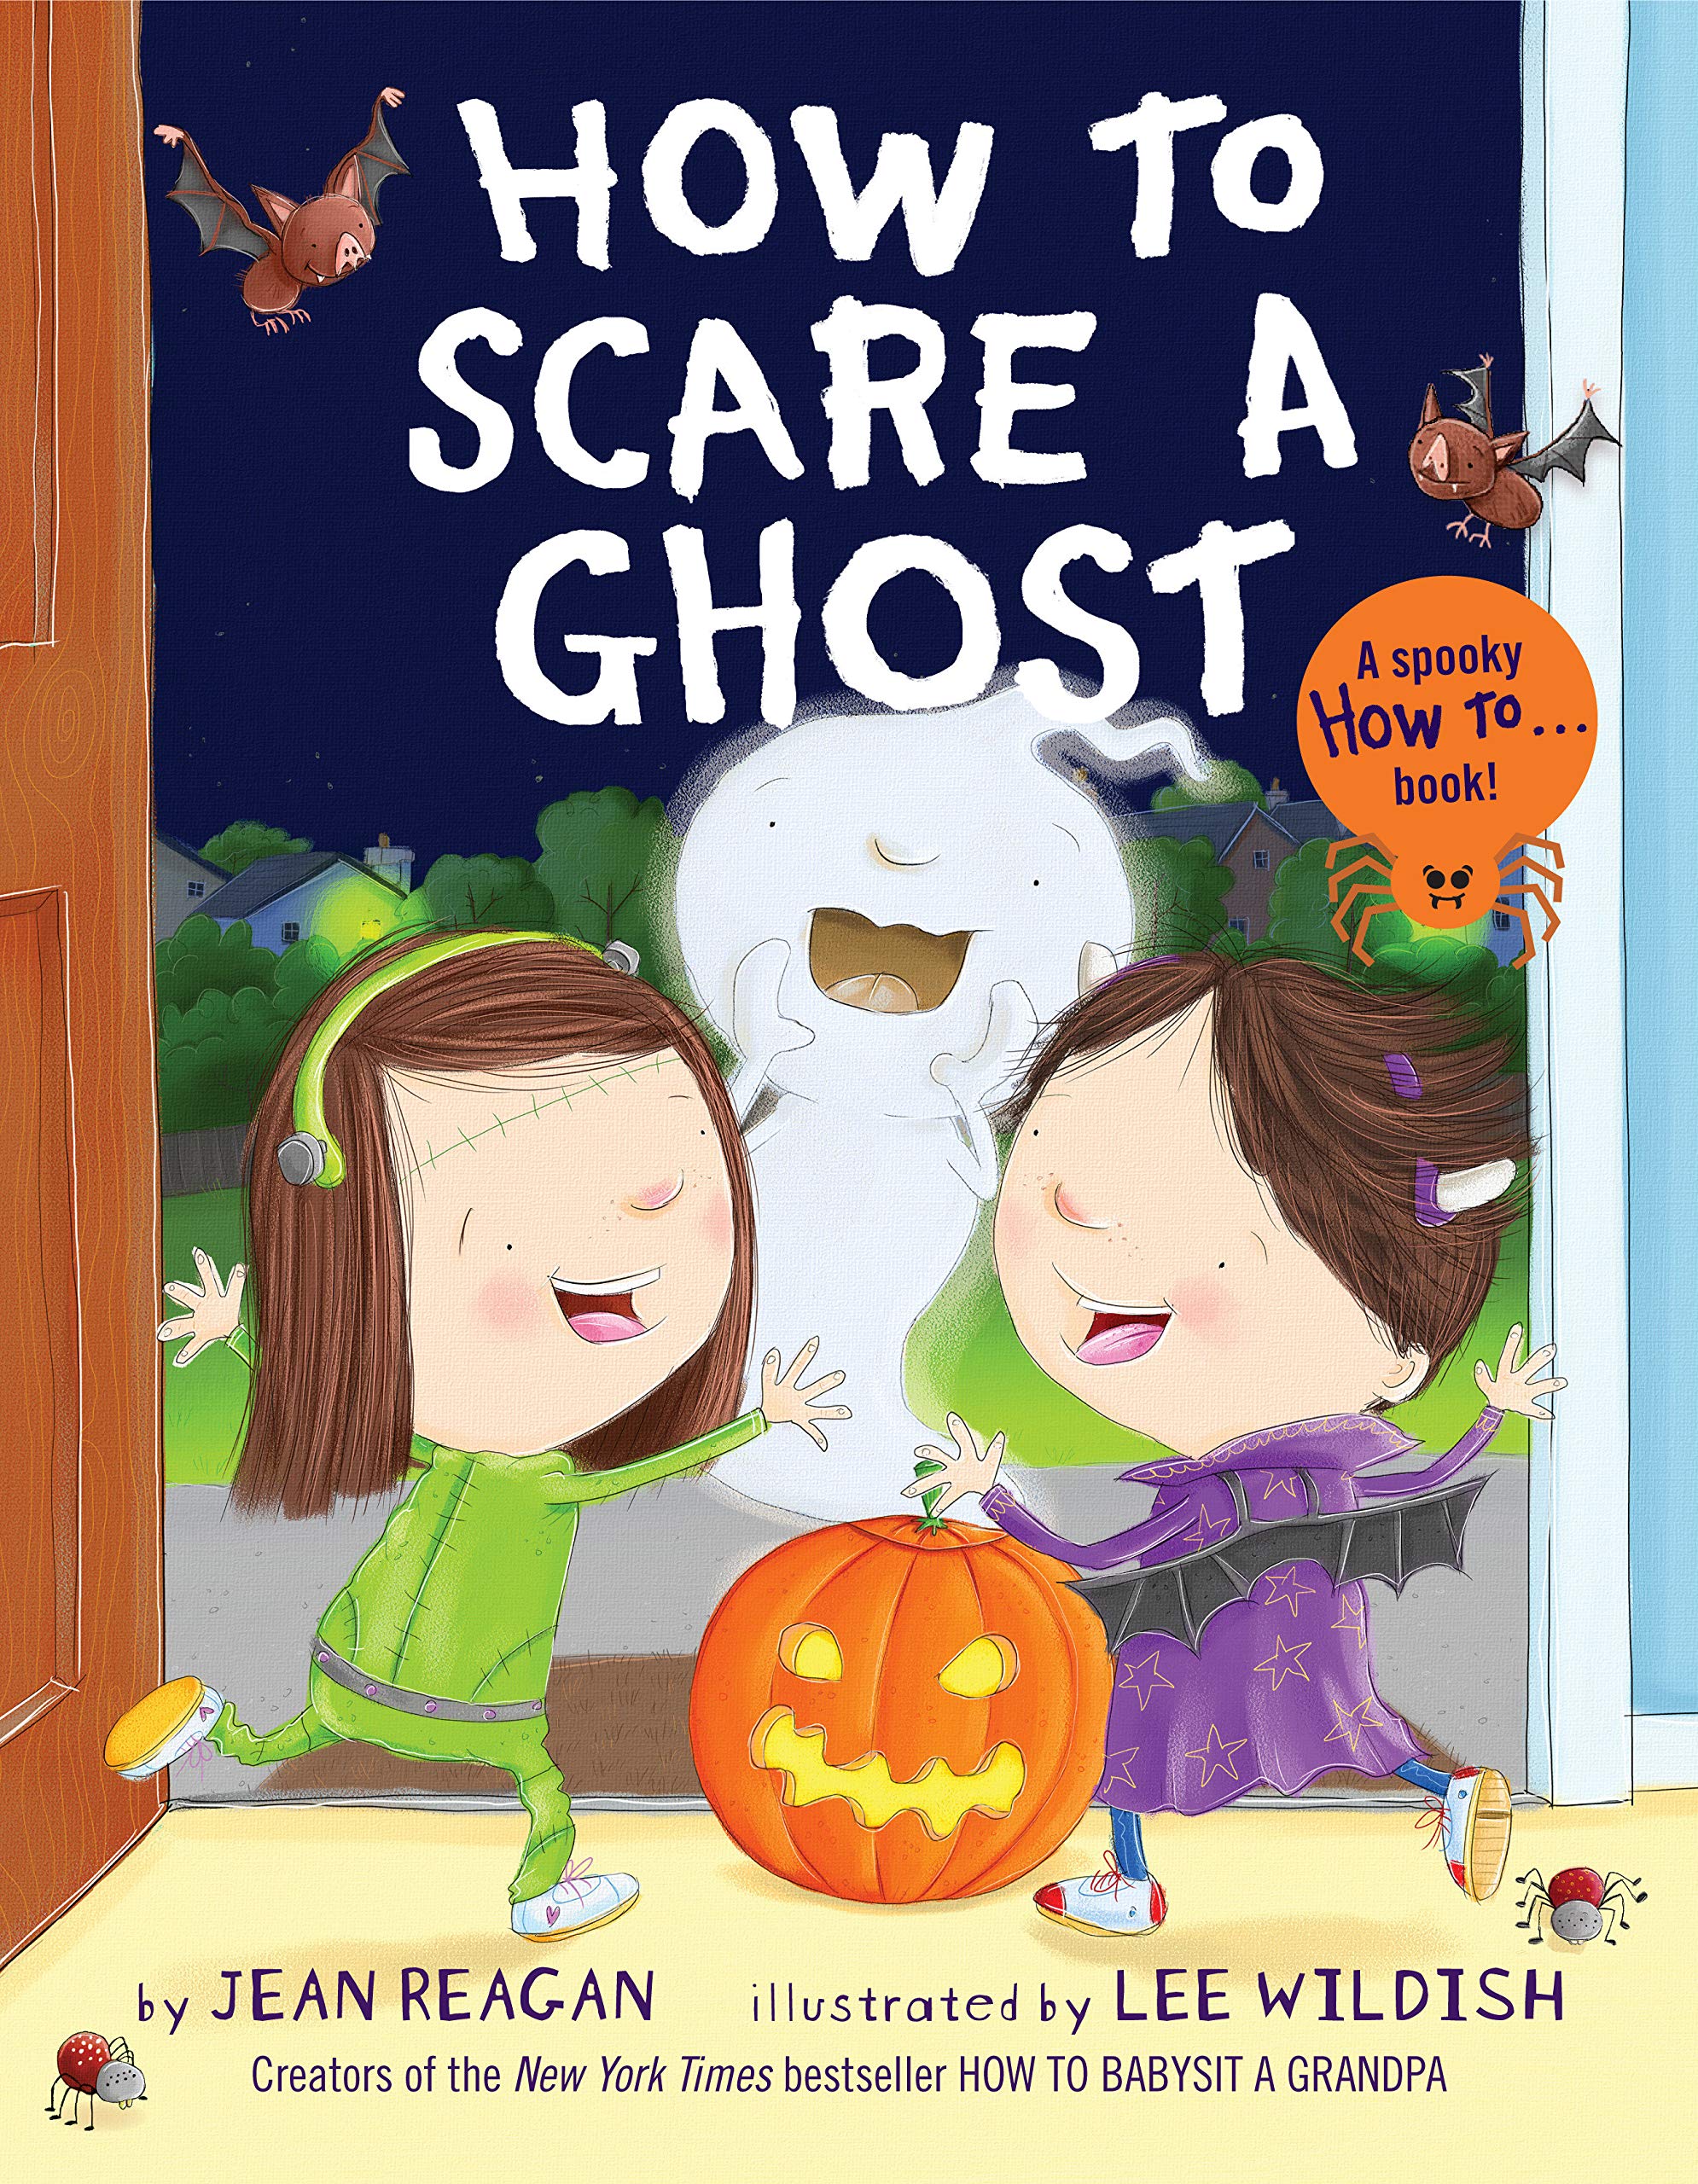 speech and language teaching concepts for How To Scare A Ghost in speech therapy